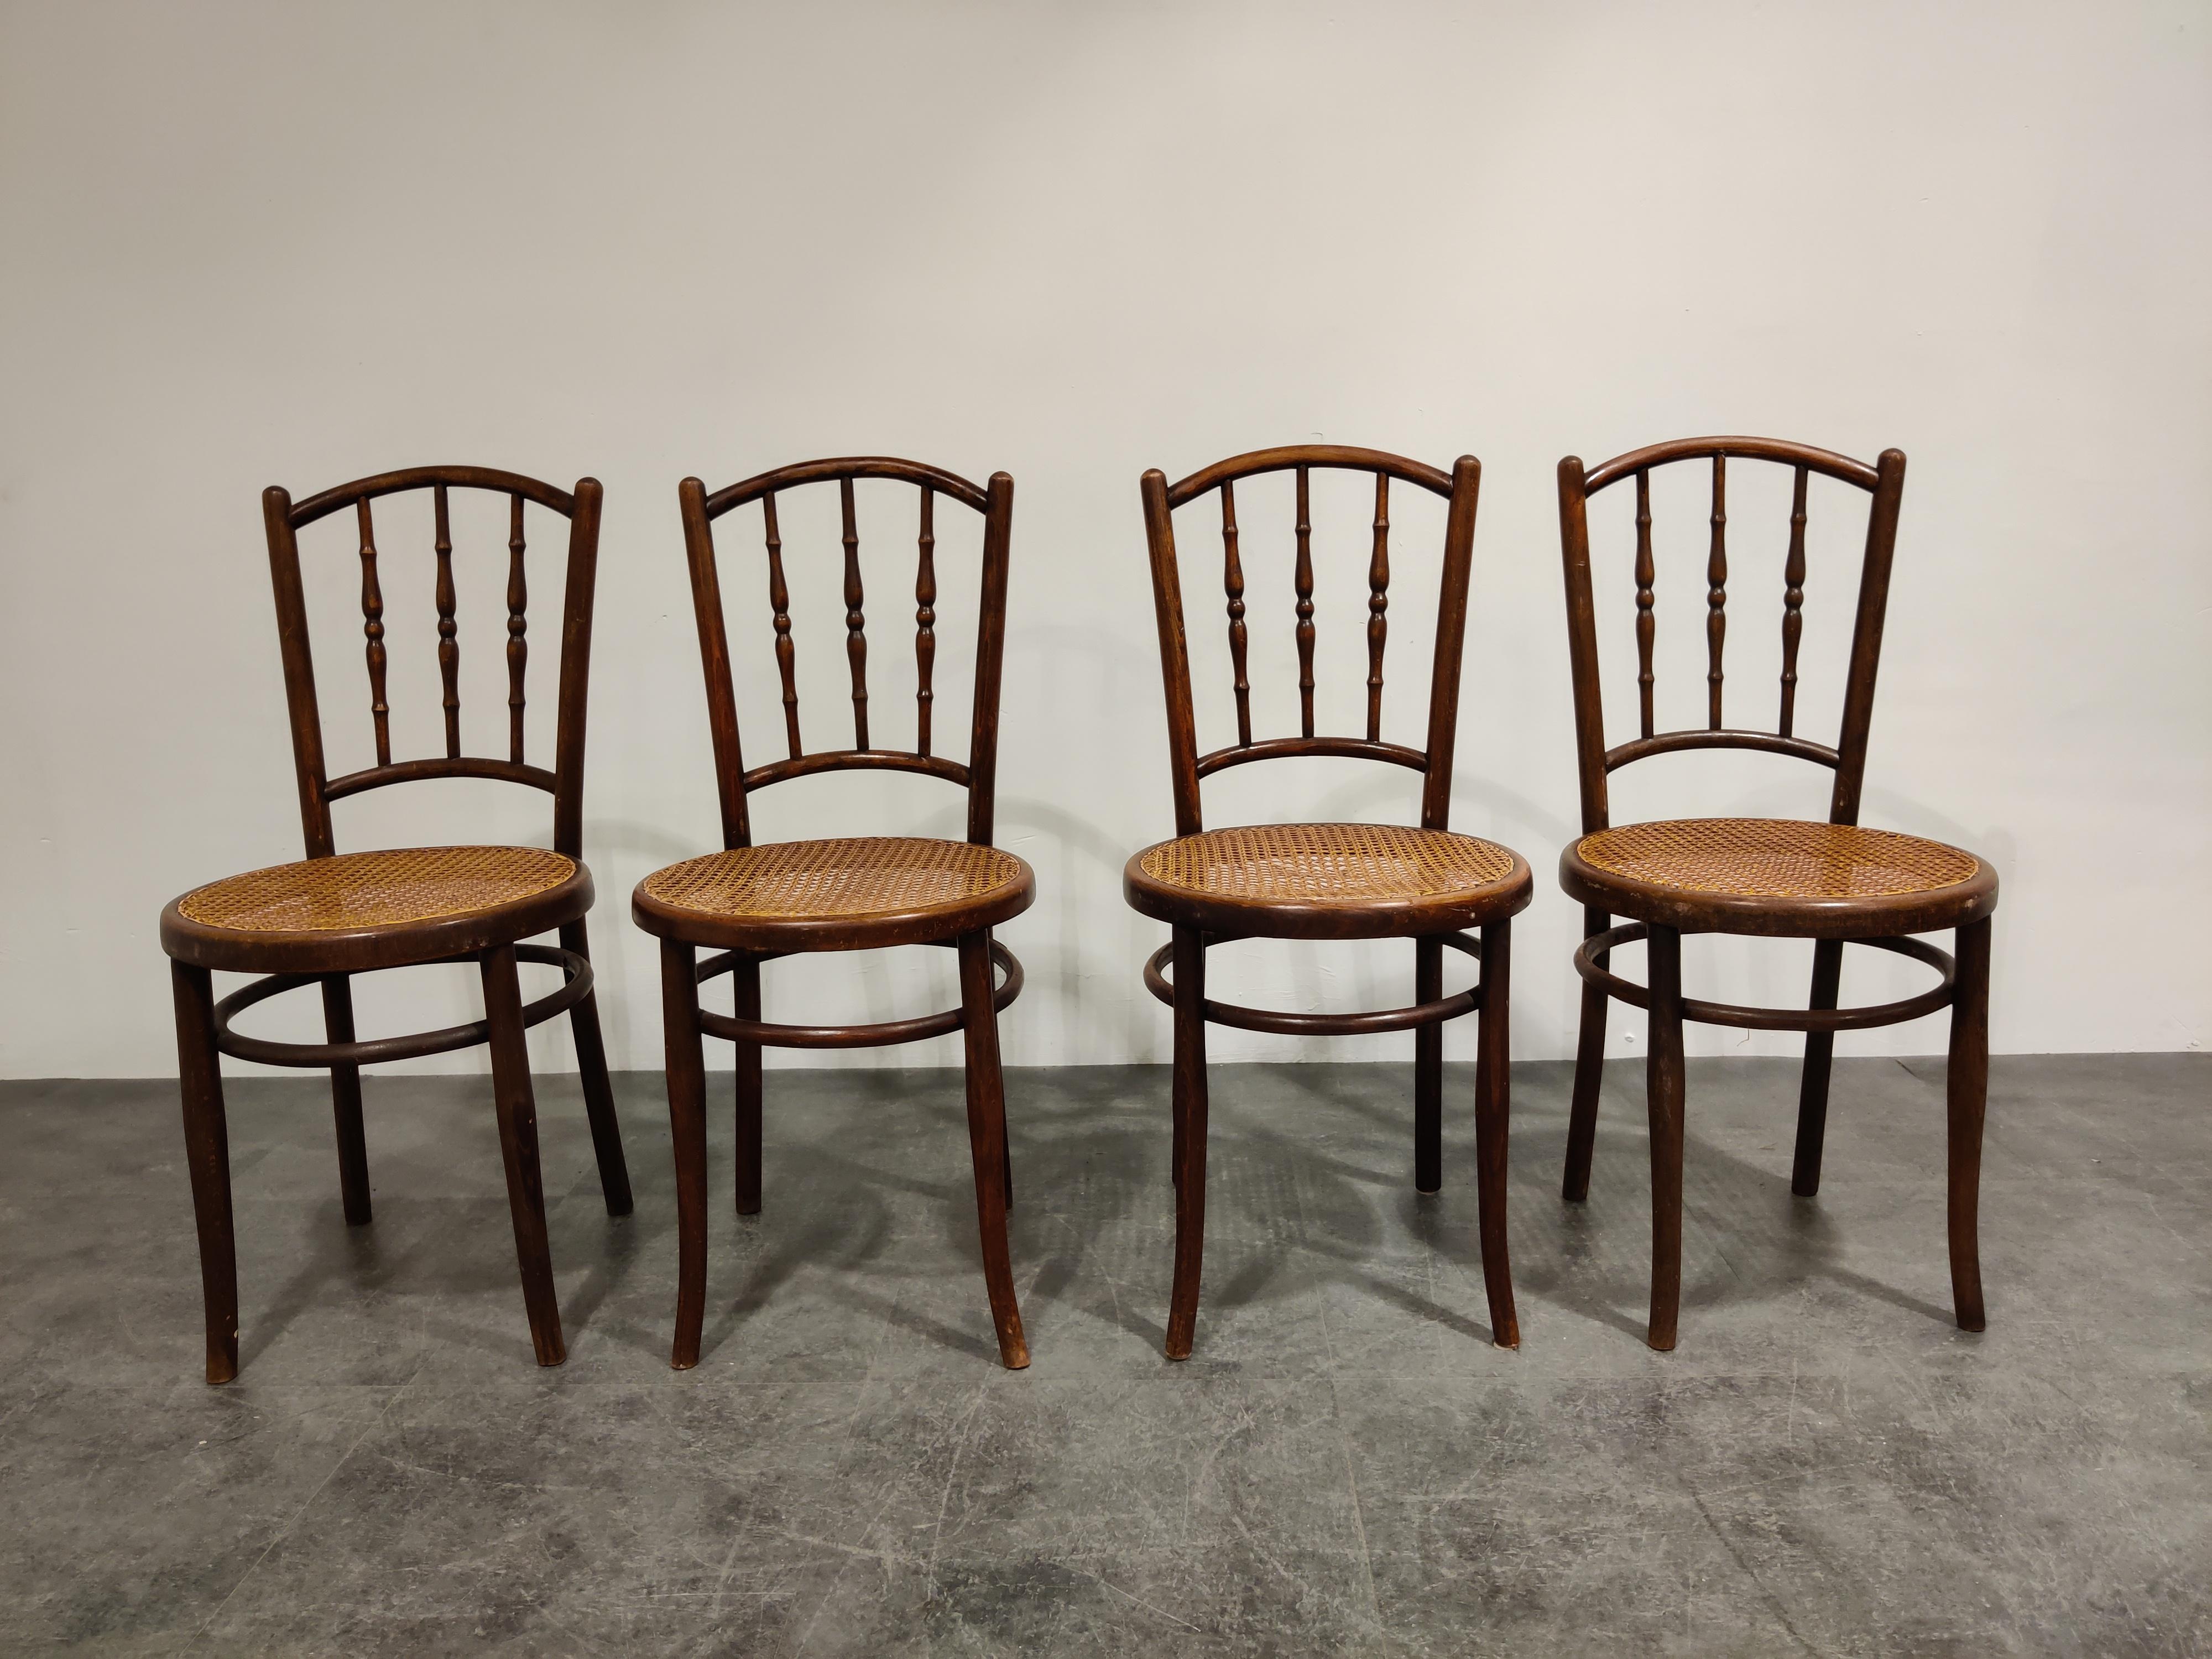 Set of 4 bentwood bistro chairs. 

This chairs were made in the 1920s by Jacob U. Josef Kohn.

As you can see in the pictures, the chairs are very similar to the famous 'Thonet' chairs.

1920s, Austria

The chairs are marked at the bottom.